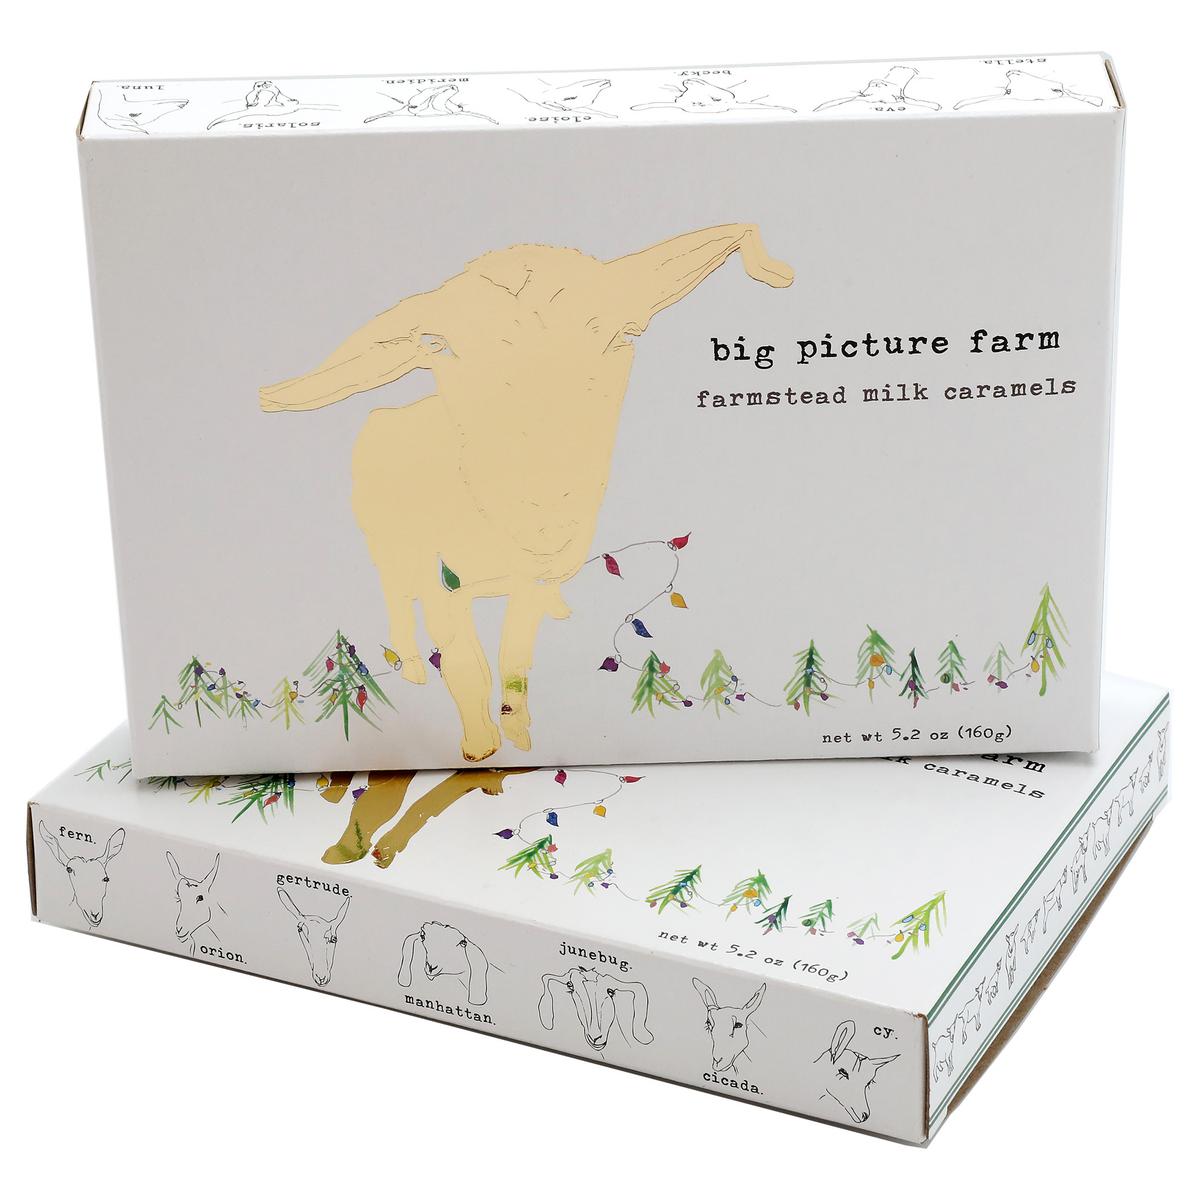 Big Picture Farm's Golden Holiday Gift Box. (Courtesy of Big Picture Farm)